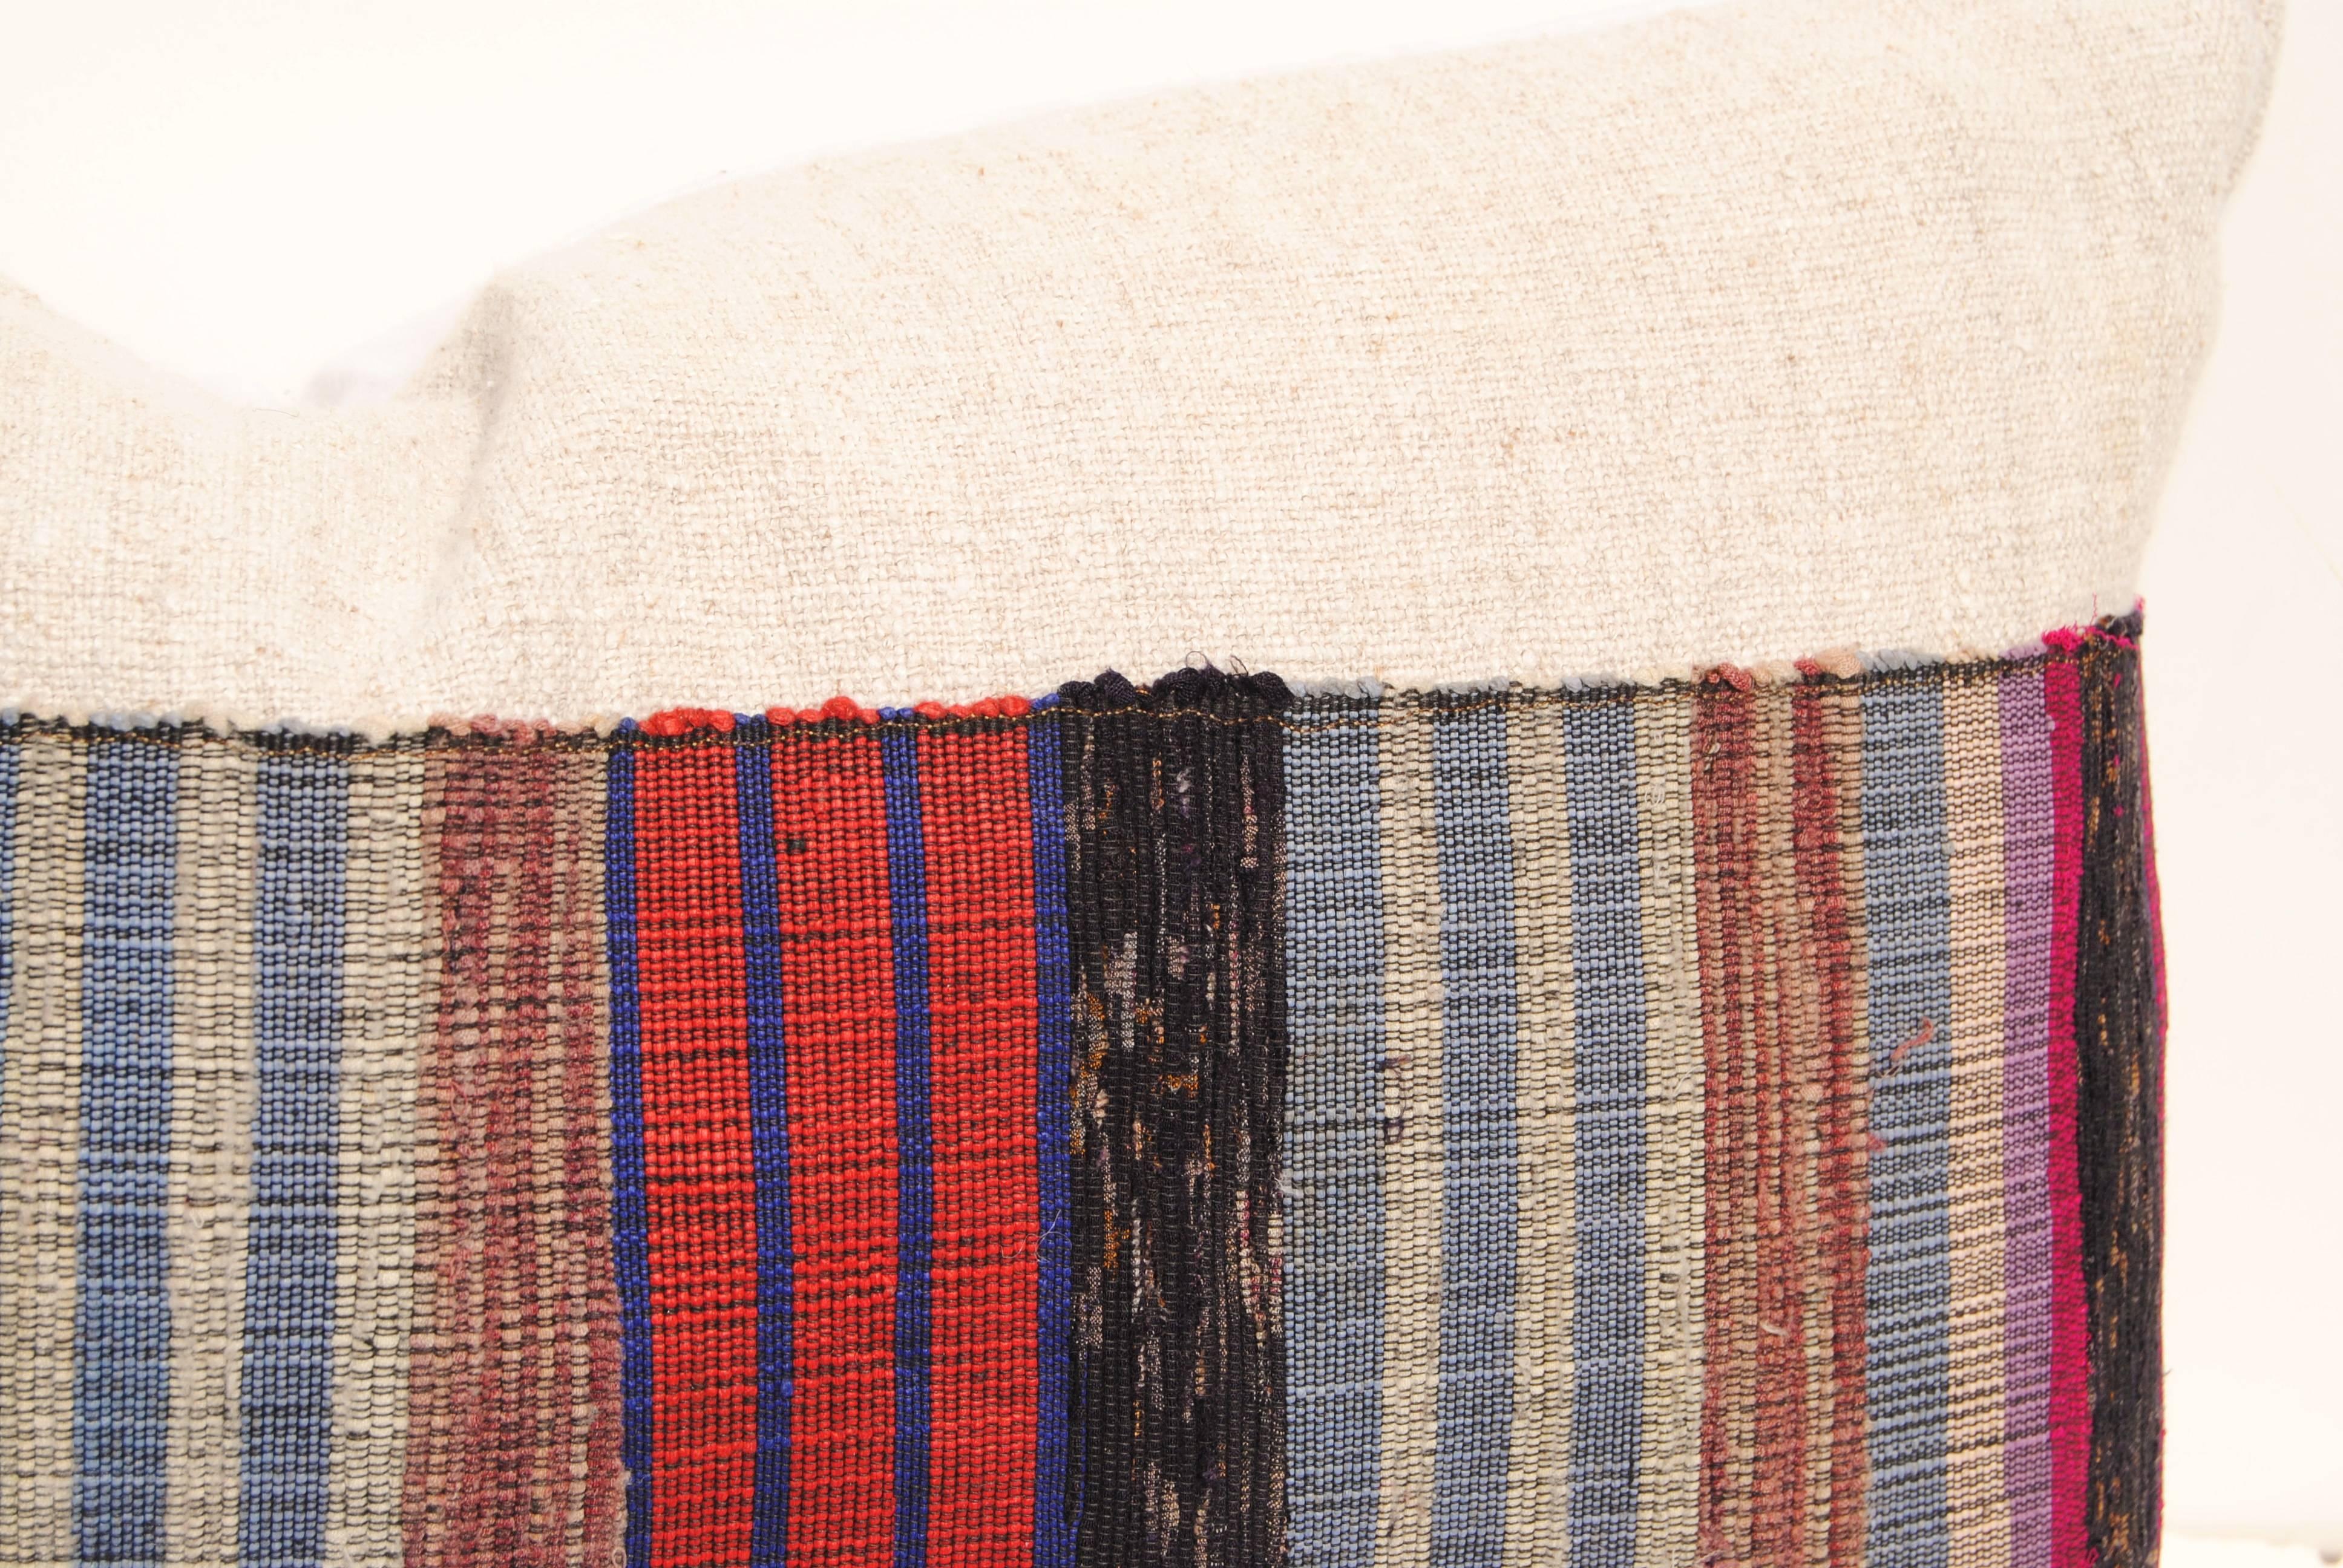 Custom pillow cut from a vintage Japanese hand loomed sakiori obi. Sakiori is the Japanese technique of Fine rag weaving. Remnants of silk and assorted textiles are cut into thin strips and rewoven into obis. This vintage obi is backed with hand